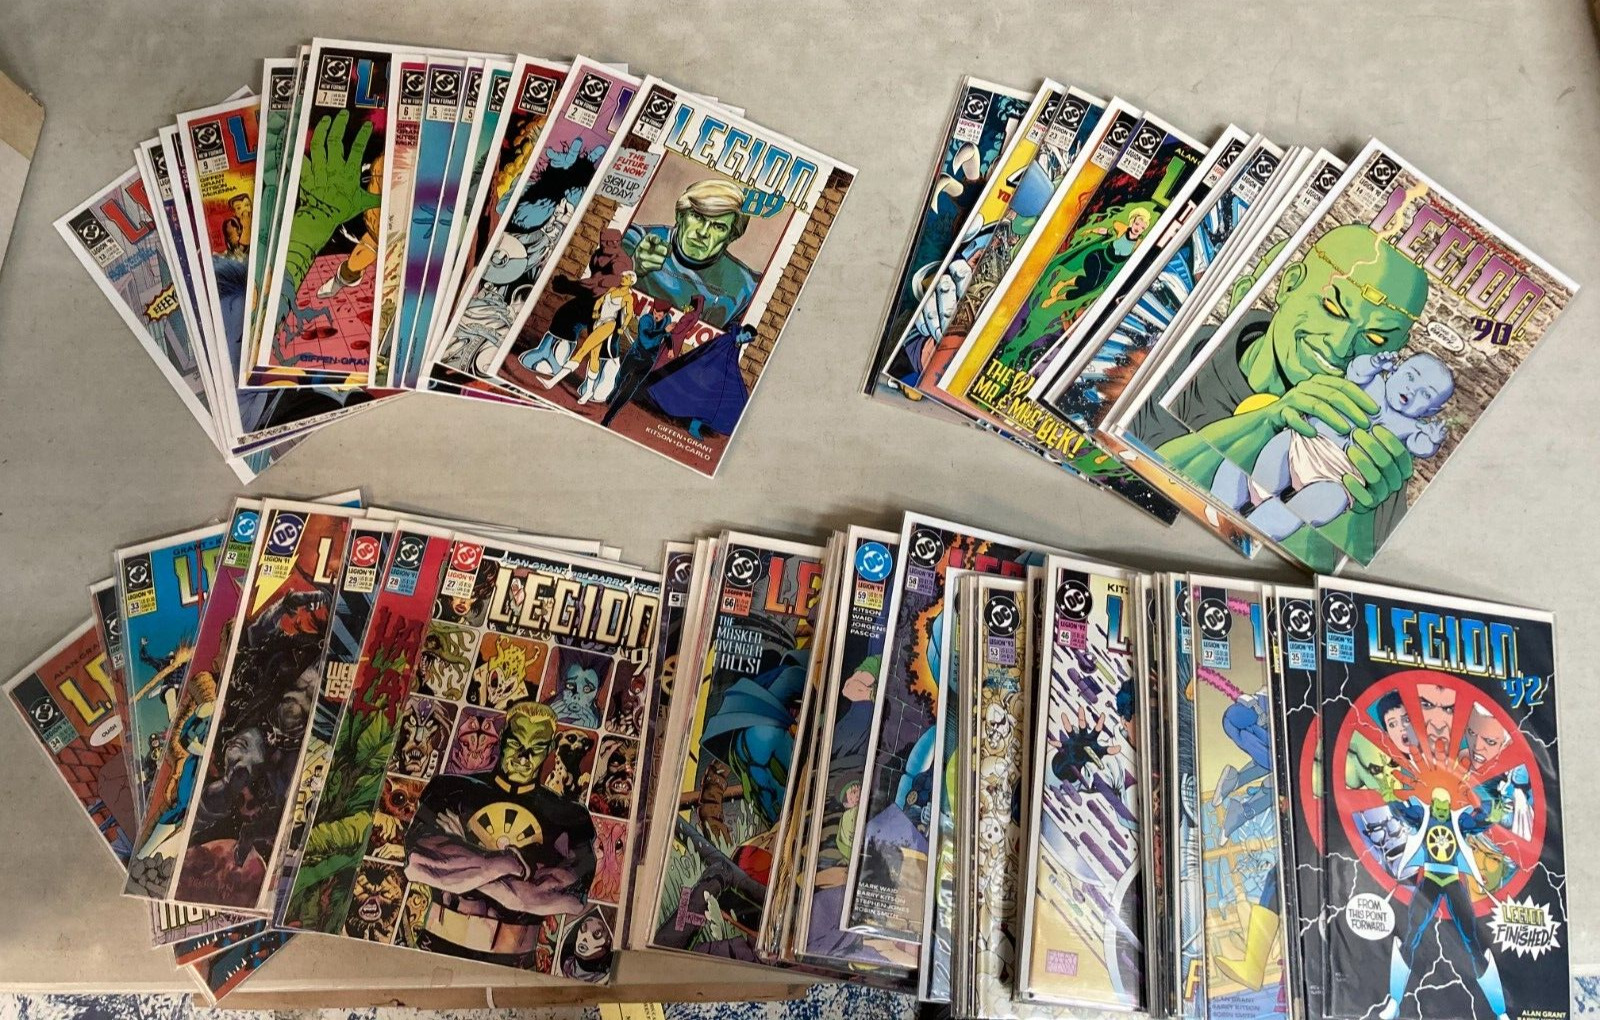 L.E.G.I.O.N. Complete Series Issues 1-70 1989 1st Series + More